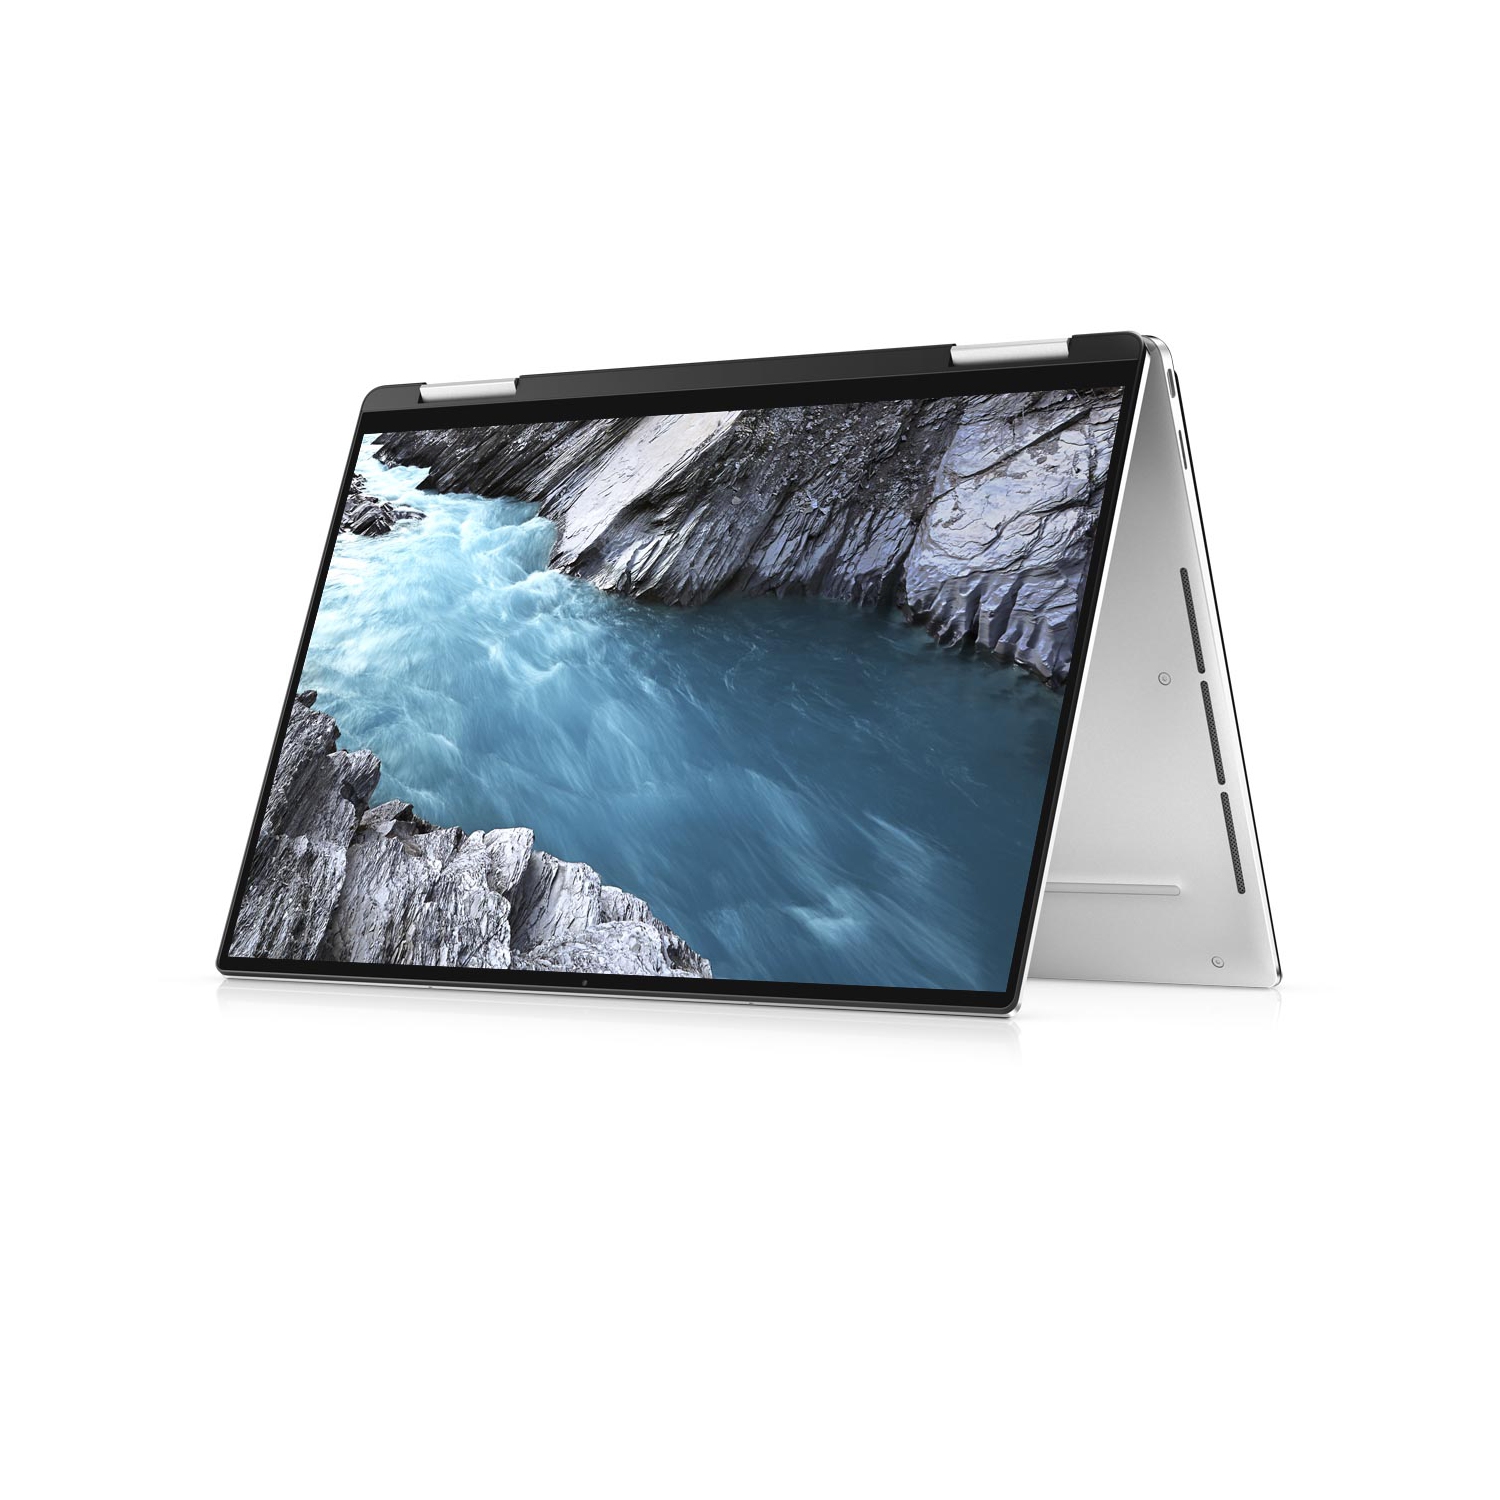 Refurbished (Excellent) - Dell XPS 13 7390 2-in-1 (2019) | 13.4" 4K Touch | Core i7 - 512GB SSD - 16GB RAM | 4 Cores @ 3.9 GHz - 10th Gen CPU Certified Refurbished